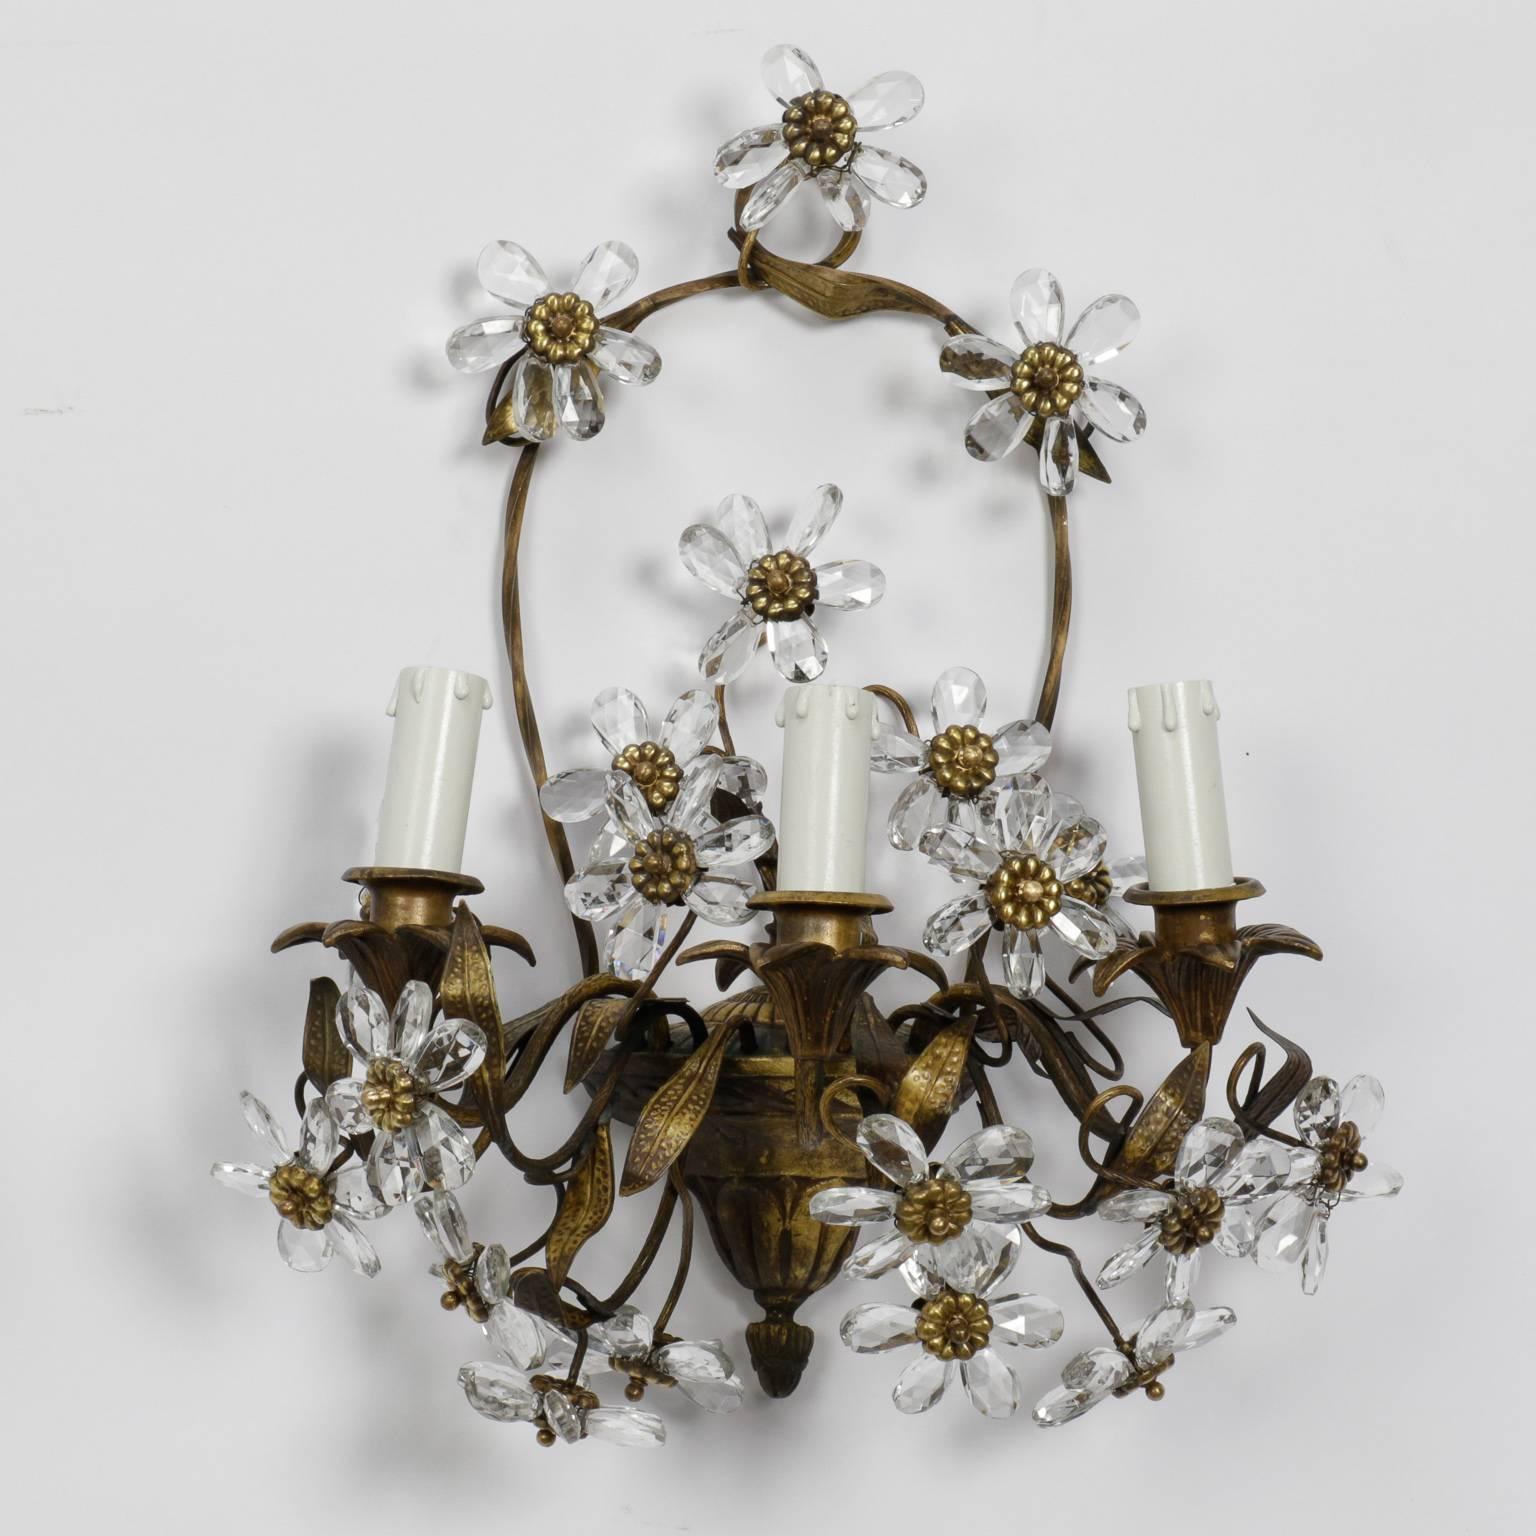 Pair of circa 1910 French wall sconces with a bronze base in the form of flower basket and three candle style lights embellished with several clear crystal and brass flowers. Sold and priced as a pair. New wiring for US electrical standards.
  